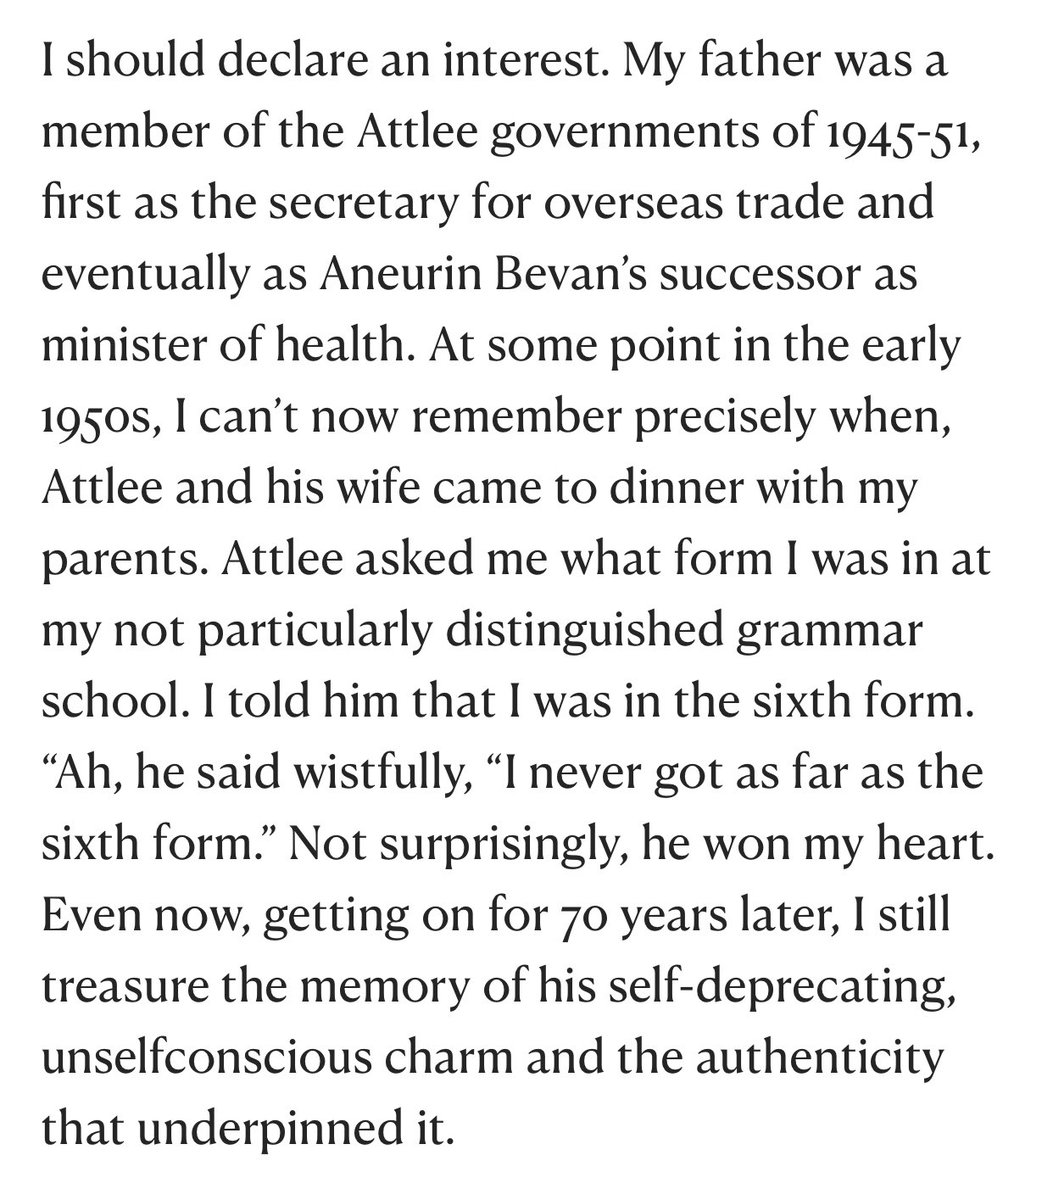 A youthful run-in with Attlee, & a wonderful piece drawing on long memories and independent judgements sceptically reassessing his role newstatesman.com/culture/2016/0… Underlines what we’ve lost with David Marquand With thanks to @richardmarcj for promoting me to look it up